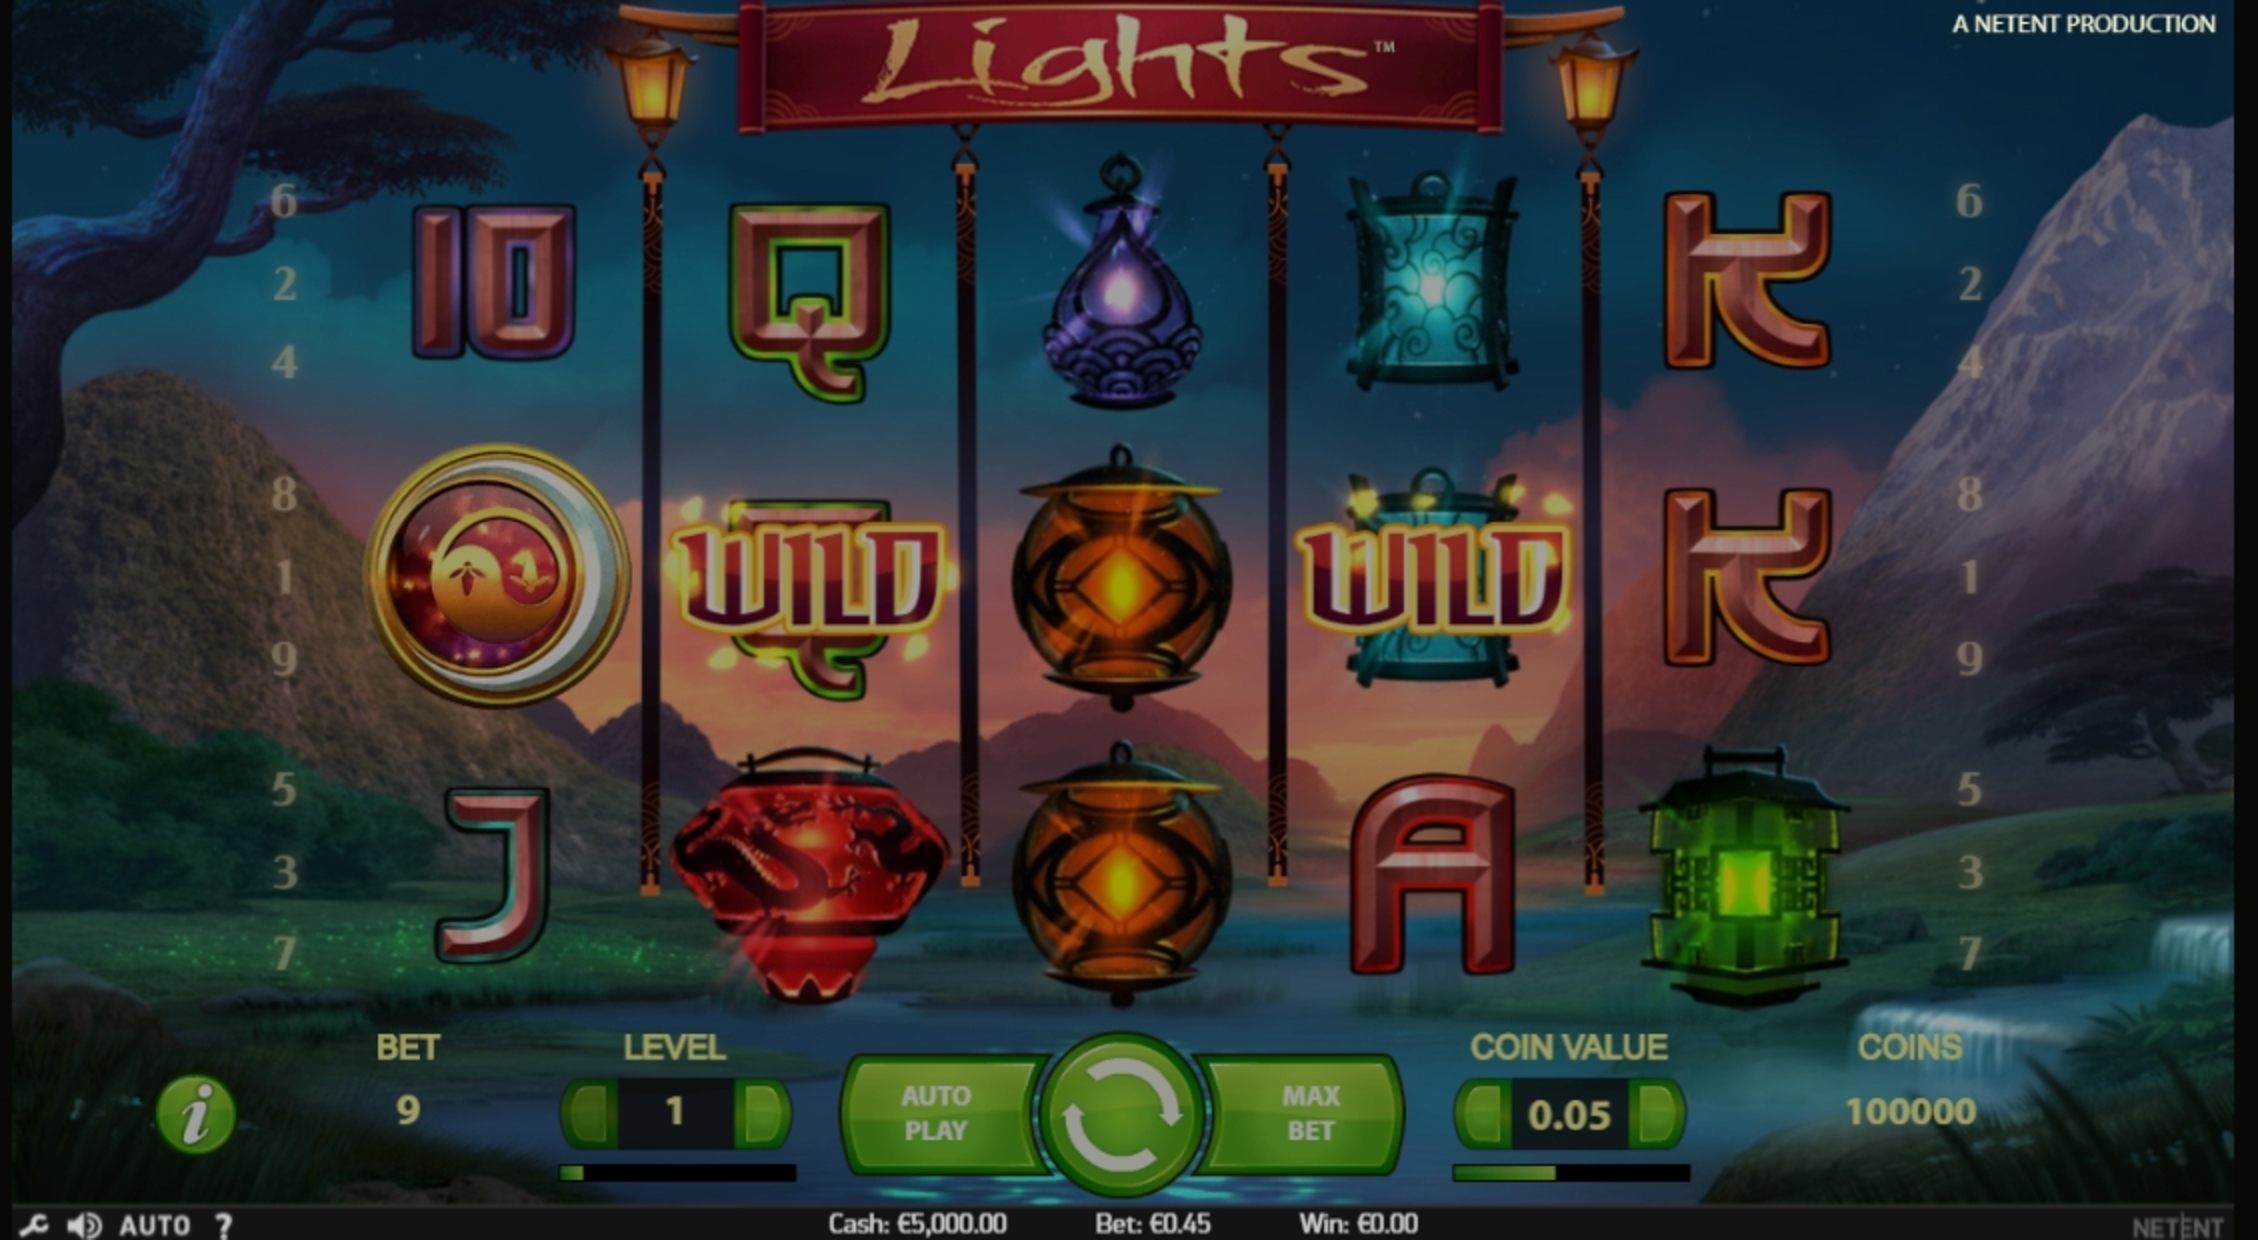 Reels in Lights Slot Game by NetEnt